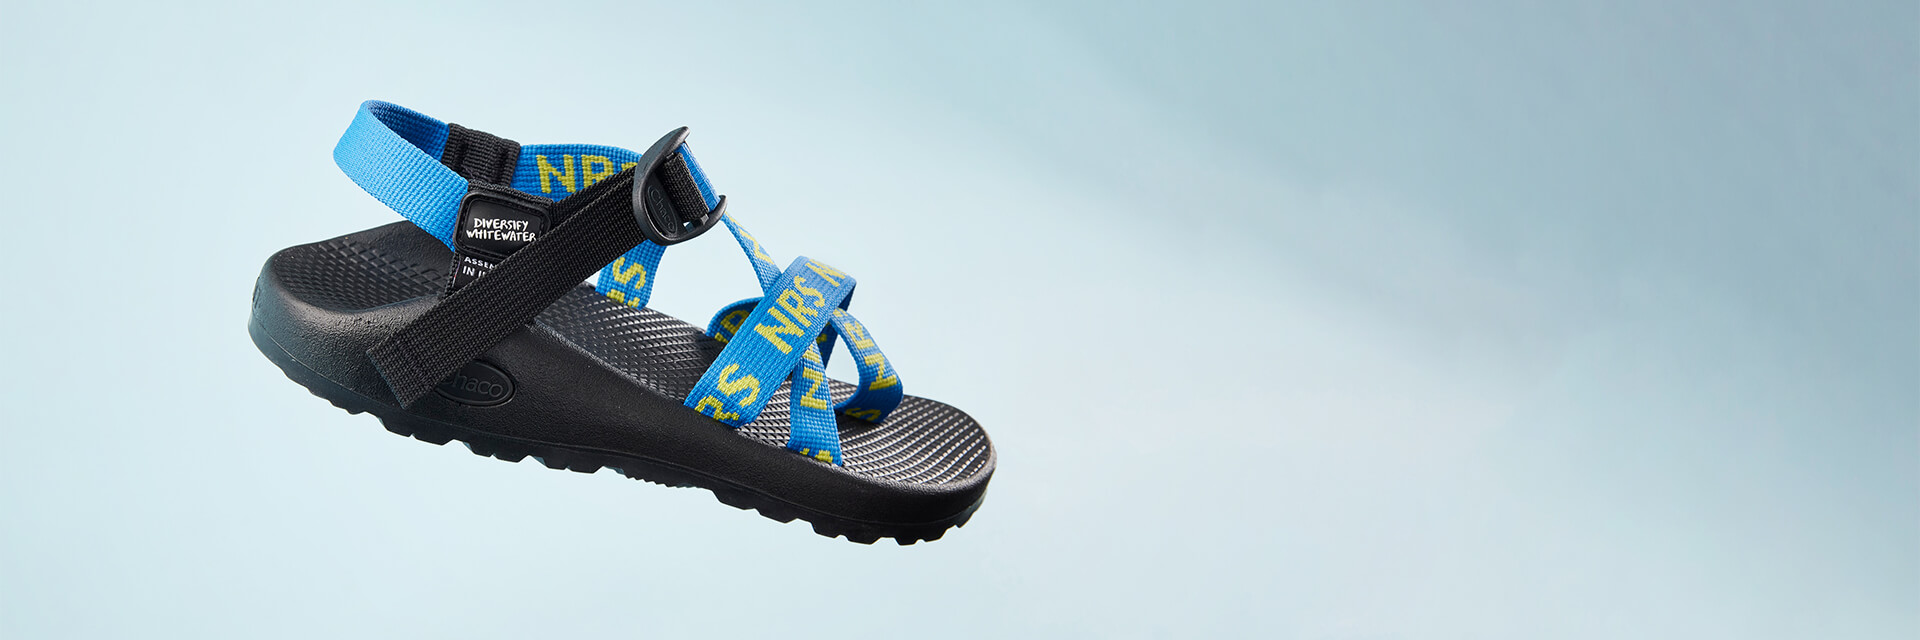 Chaco NRS sandal on a foggy blue background.